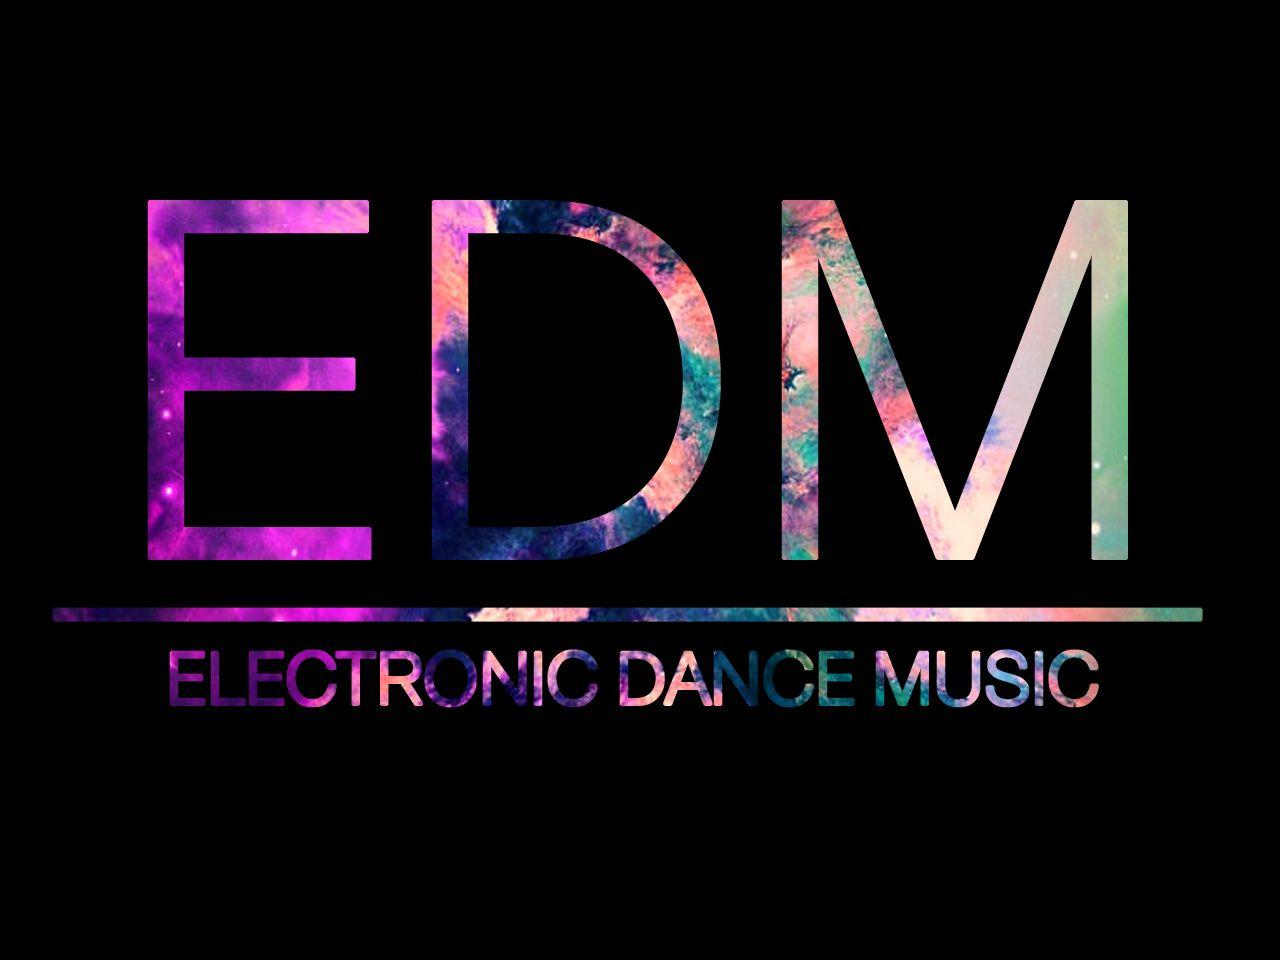 How Much Do You Know About Electronic Dance Music?